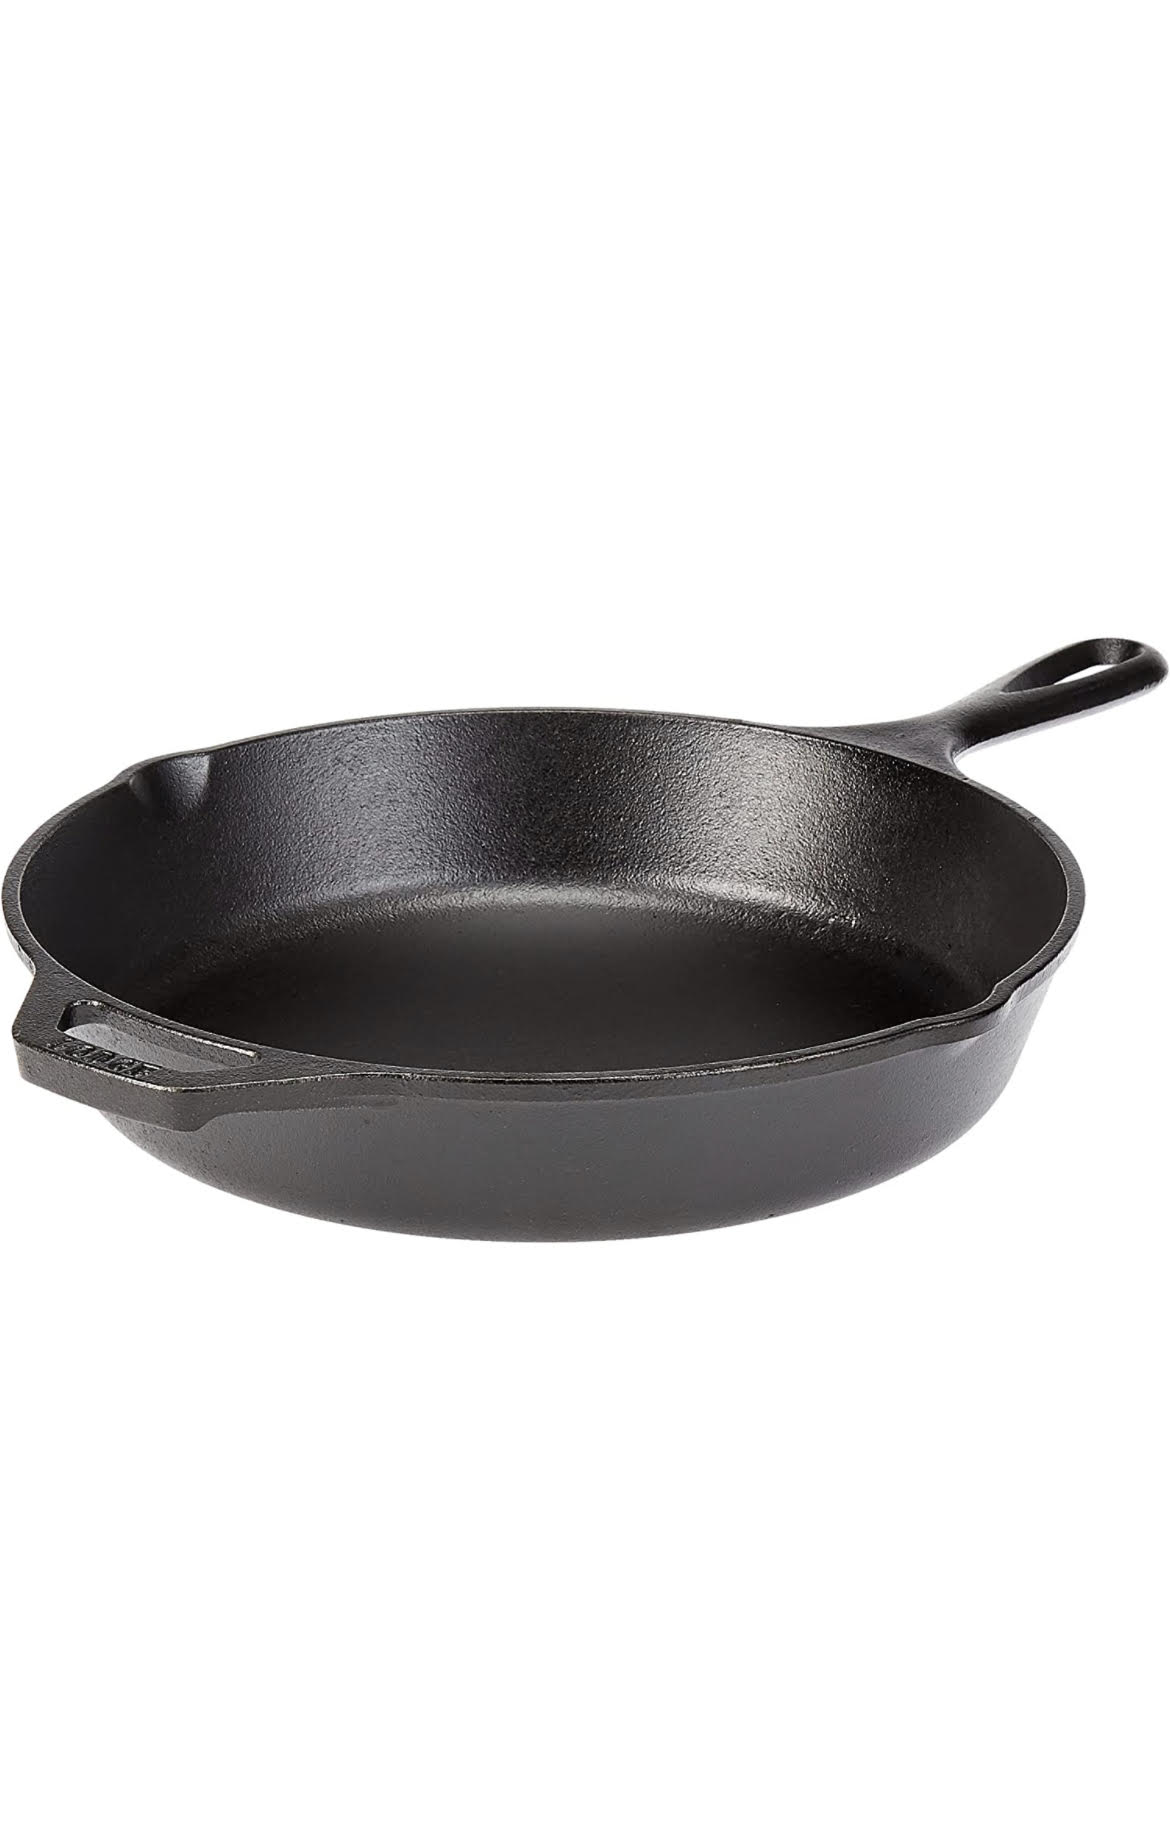 photo of a cast iron skillet